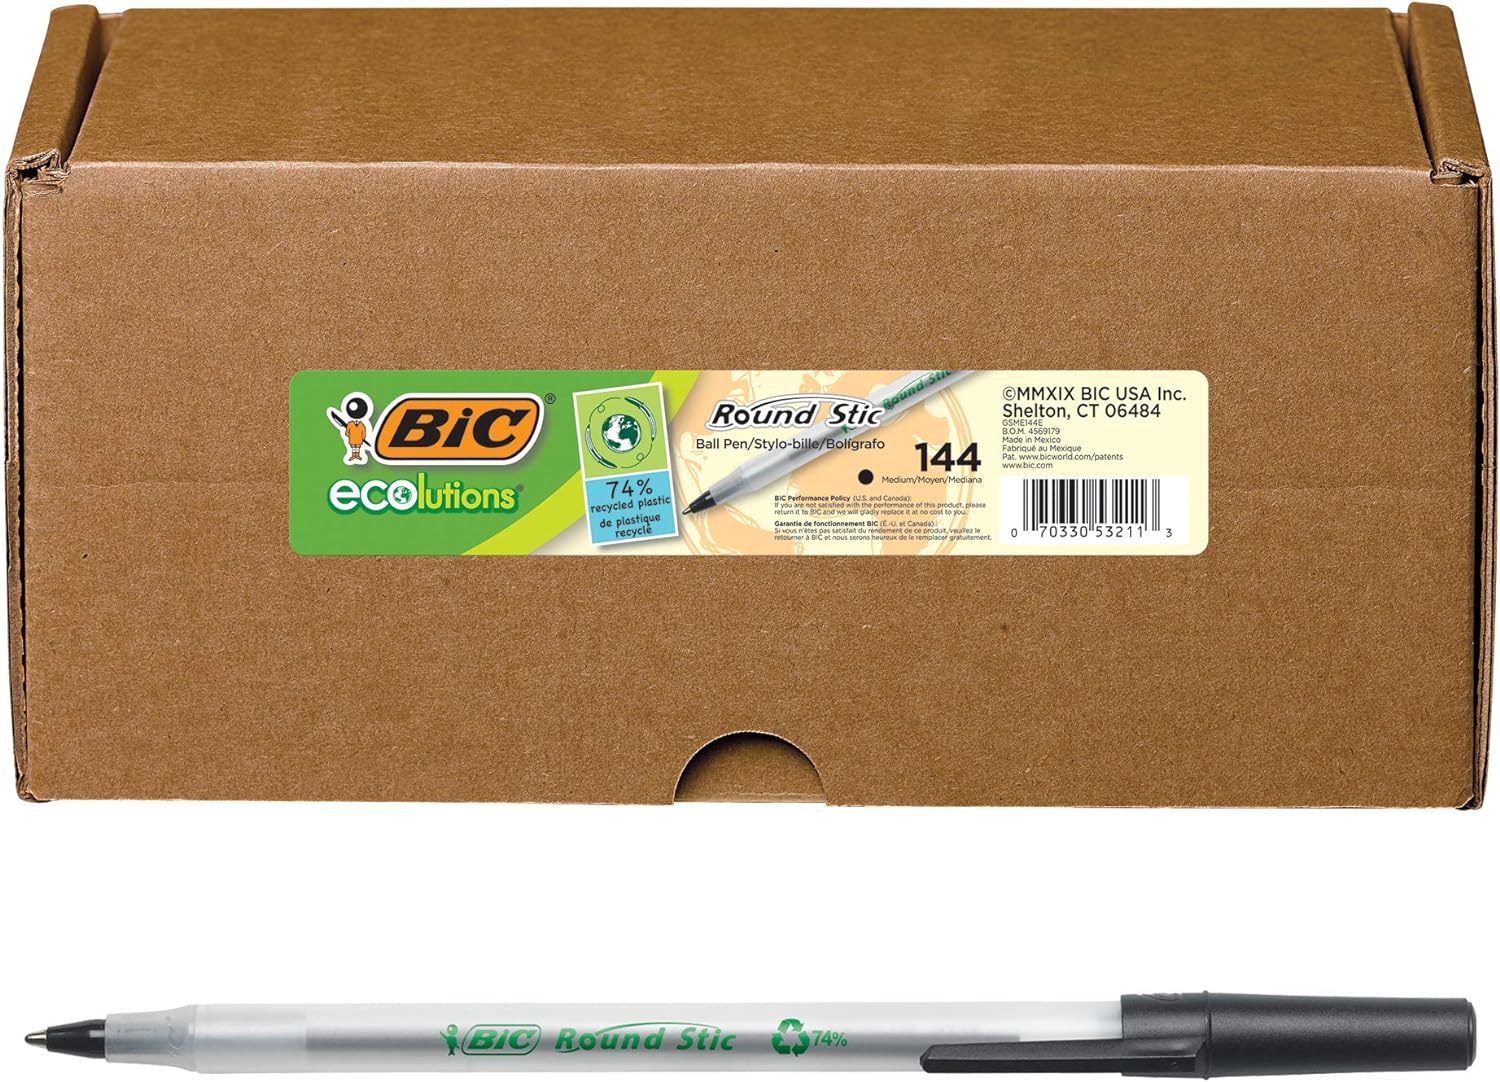 BIC+Ecolutions+Round+Stic+Ballpoint+Pen%2c+Medium+Point+(1.0mm)%2c+Black%2c+144-Count%2c+For+a+Smooth+Writing+Experience